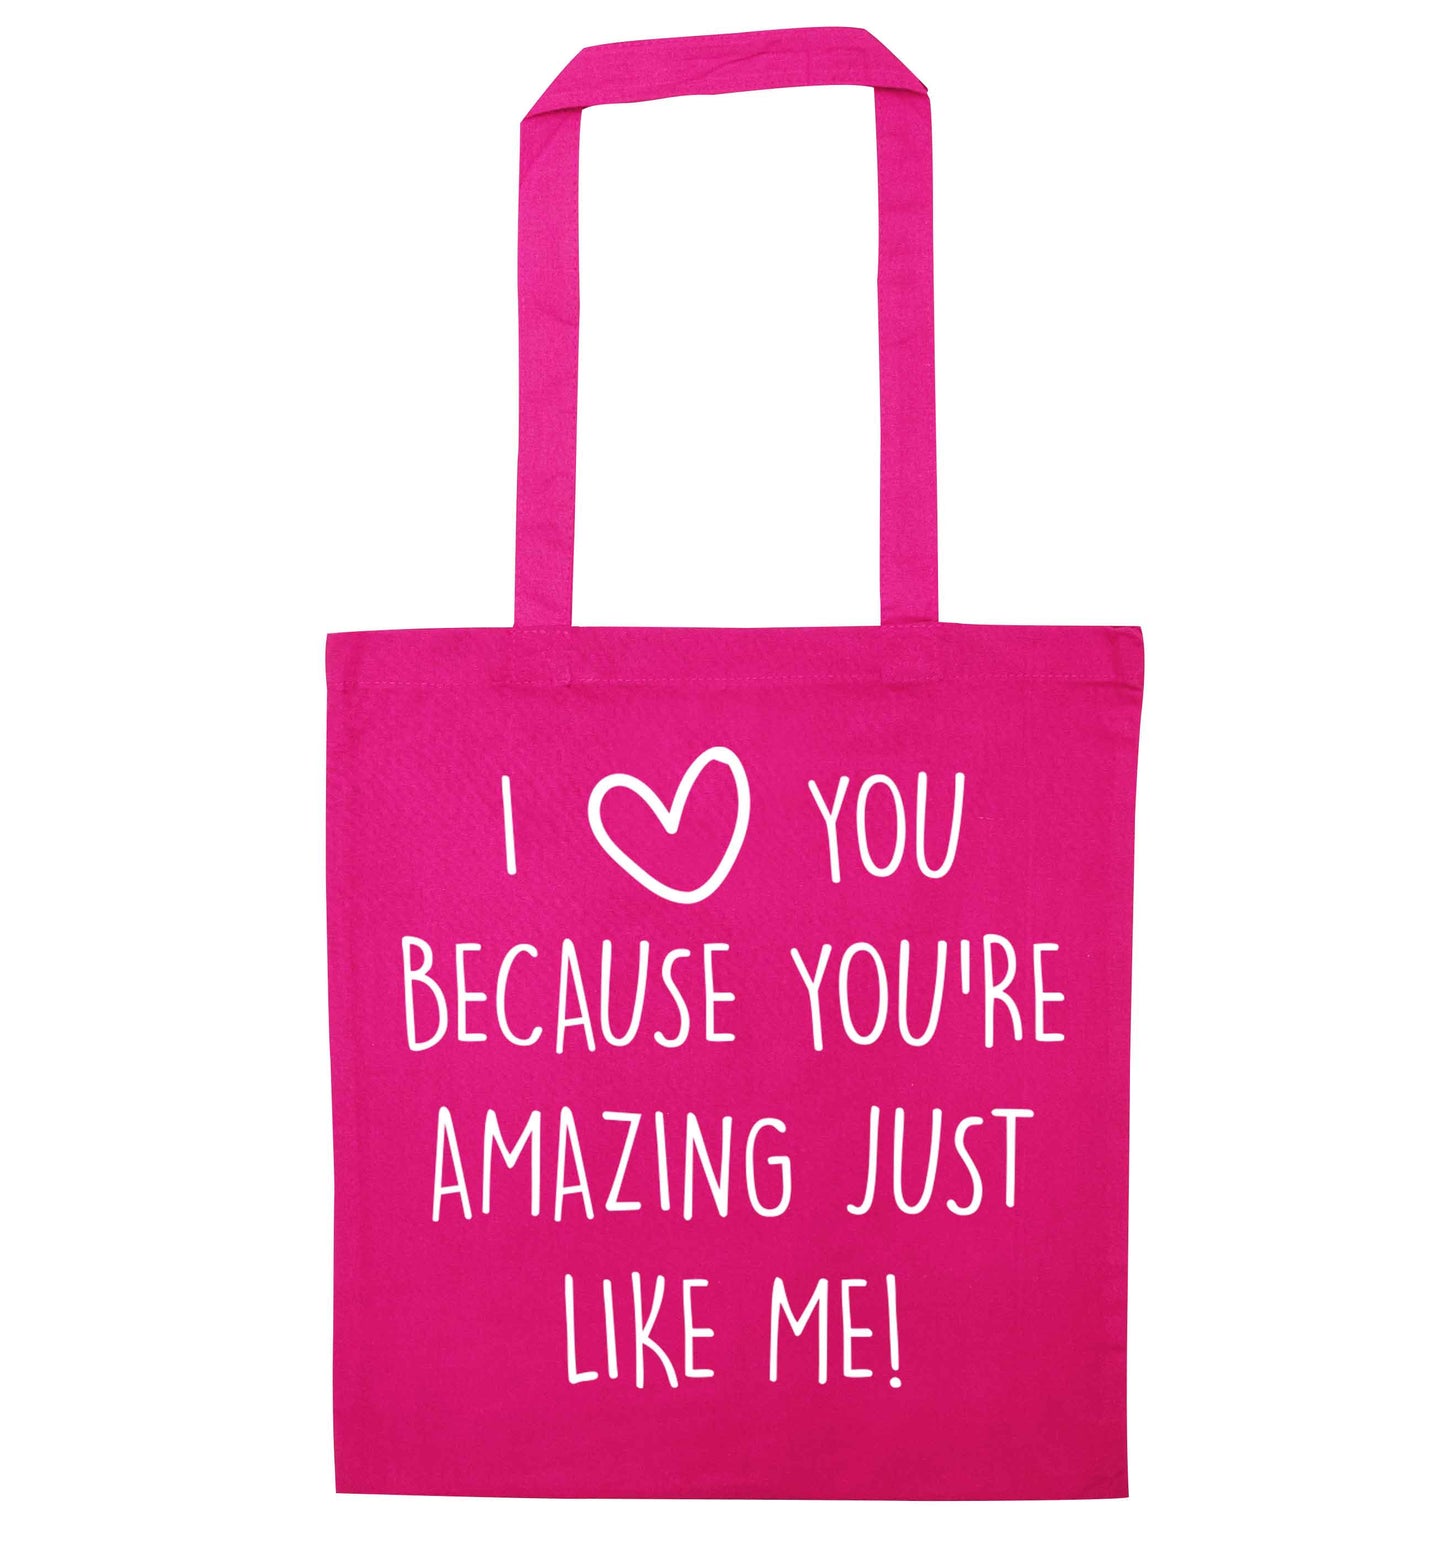 I love you because you're amazing just like me pink tote bag